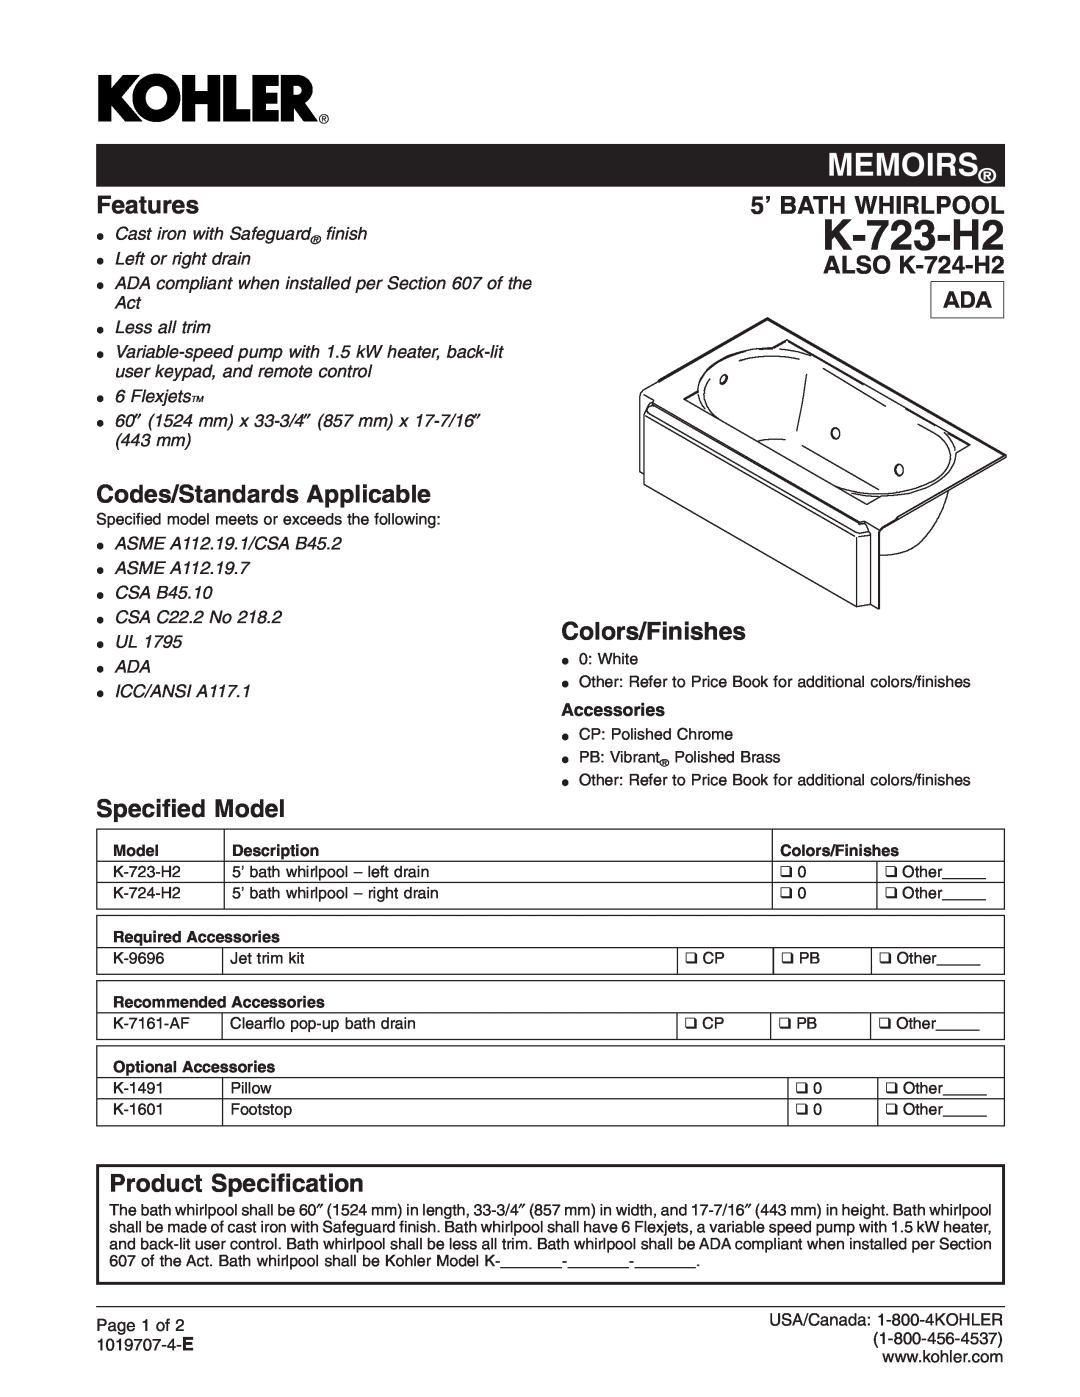 Kohler K-723-H2 manual Memoirs, Features, Codes/Standards Applicable, Speciﬁed Model, 5’ BATH WHIRLPOOL, Page 1 of 